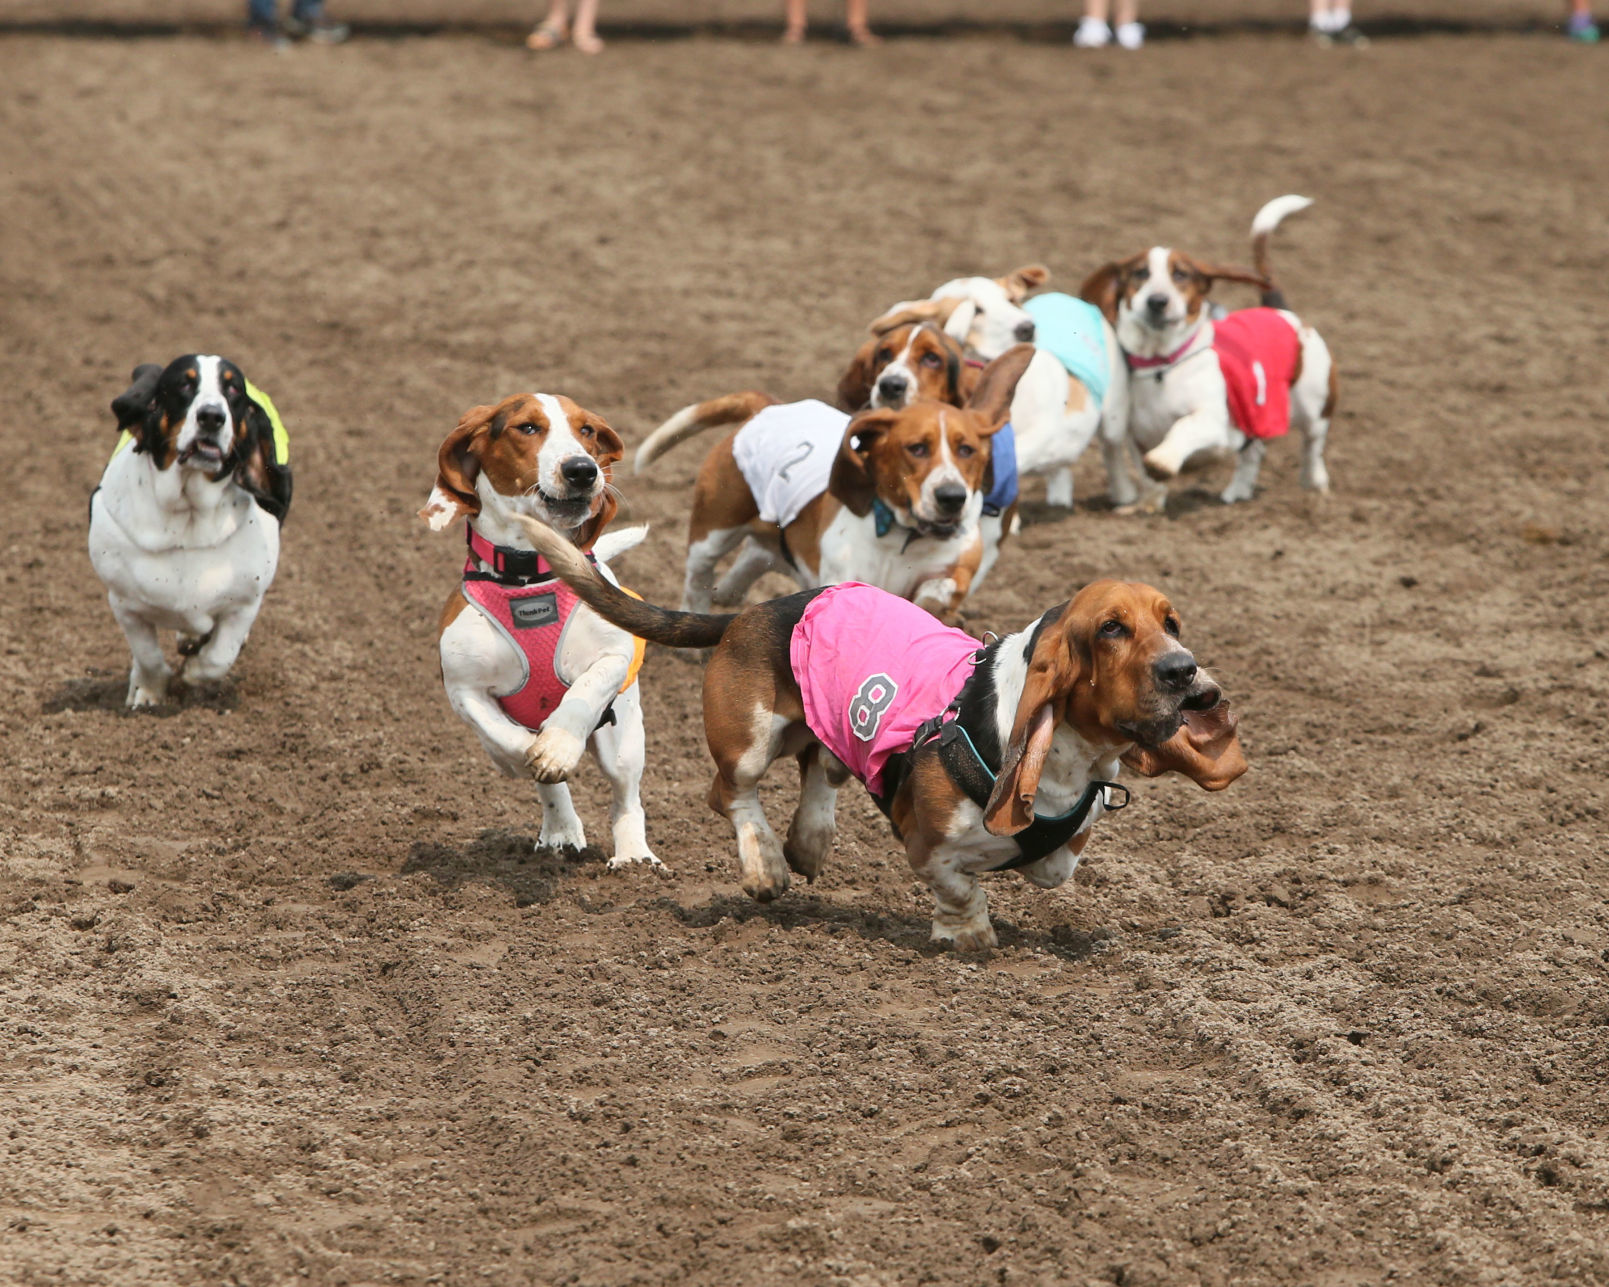 Basset Hounds take the track at 